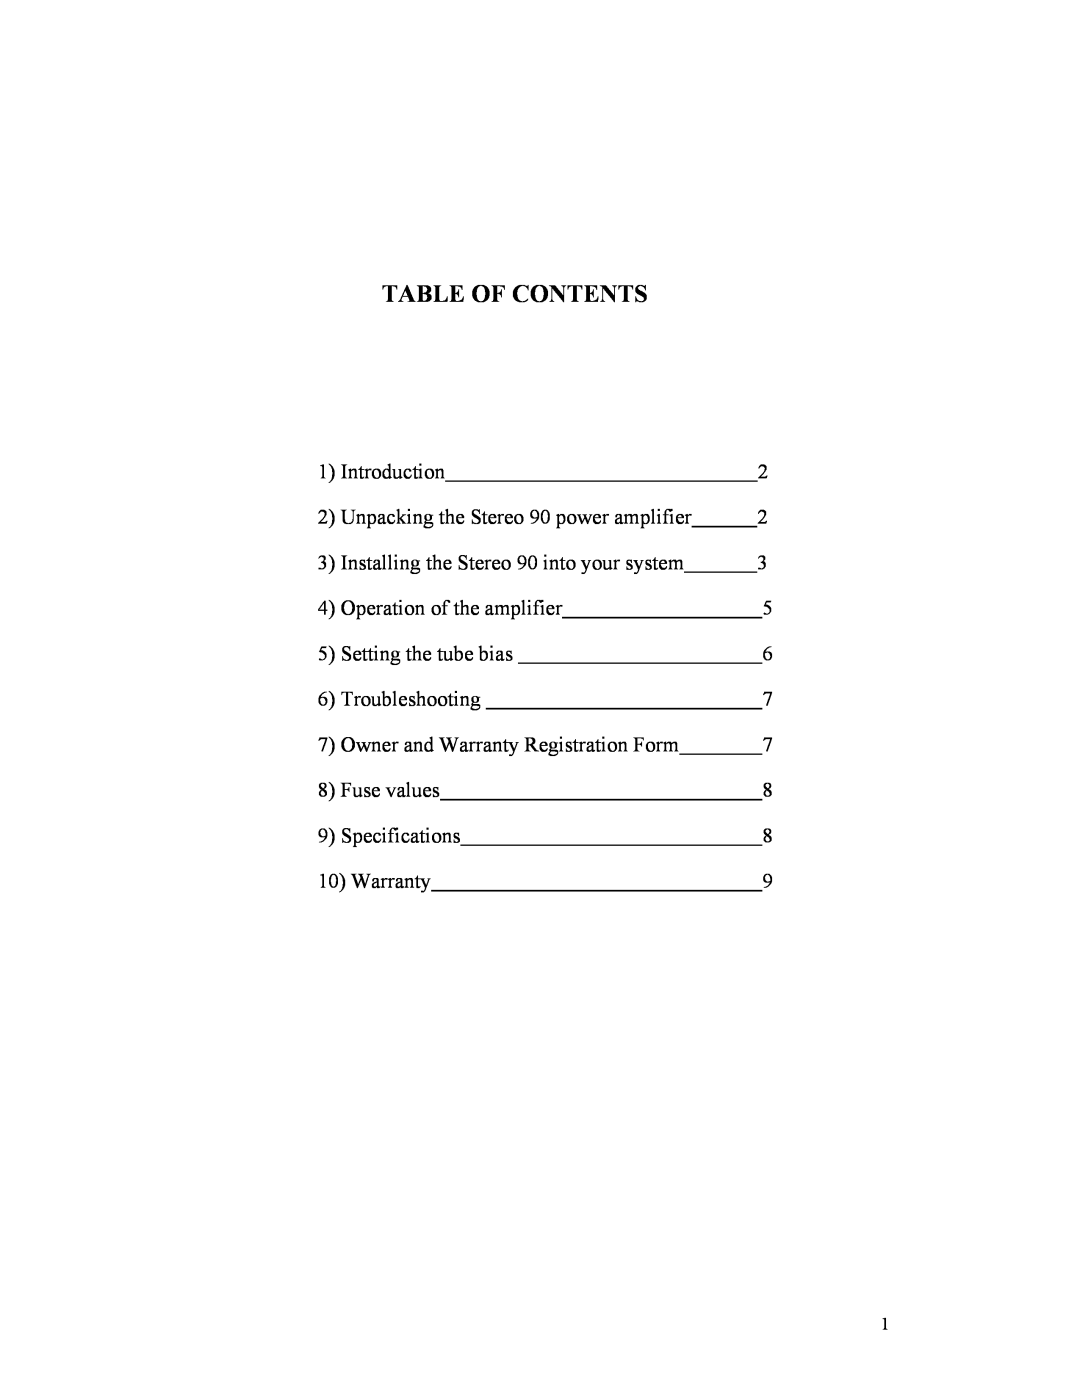 Rogue Audio Stereo 90 owner manual Table Of Contents 